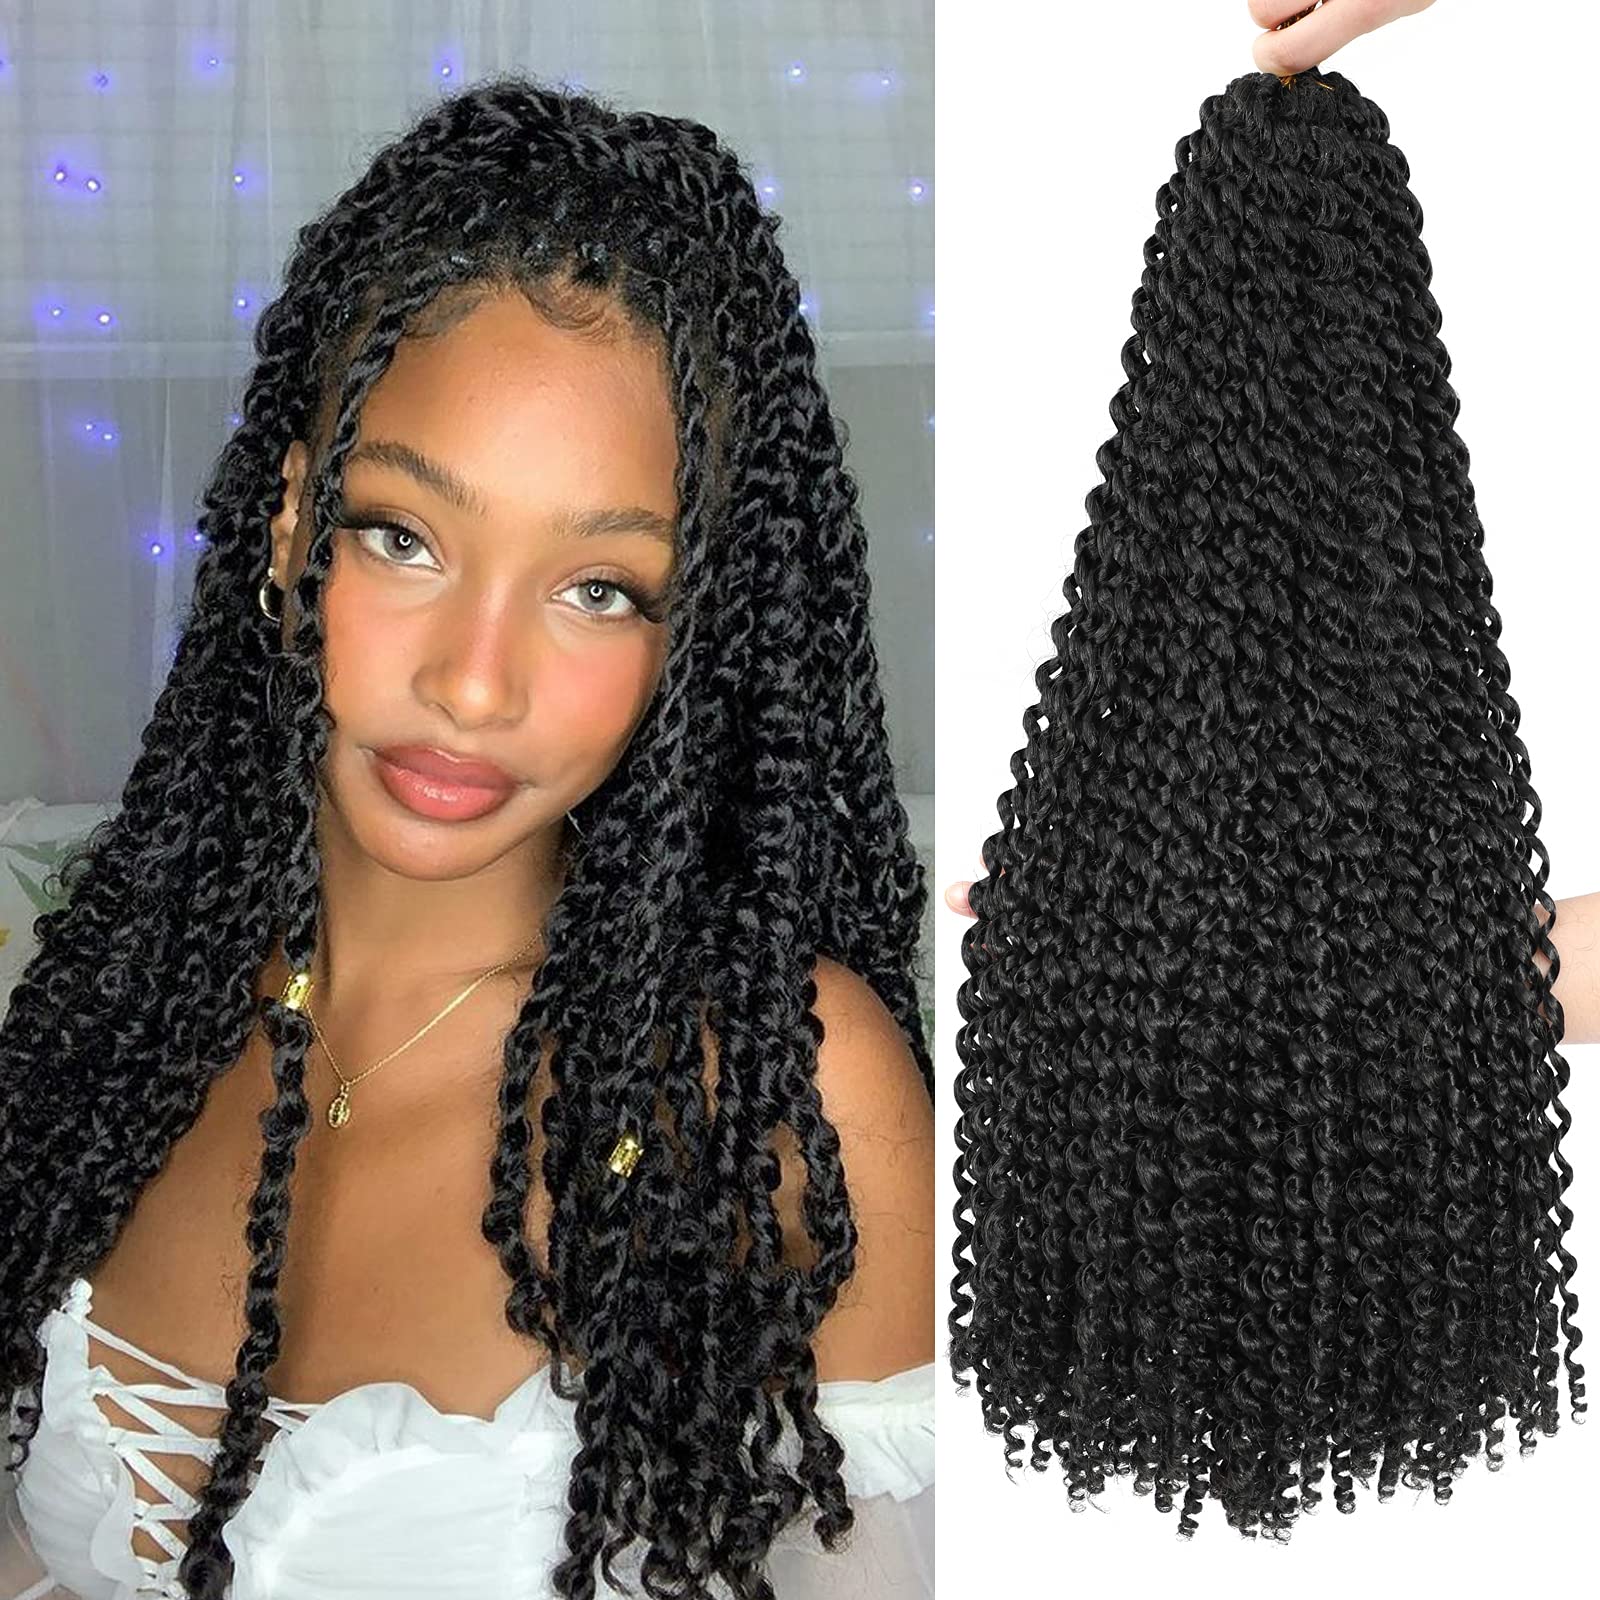 Passion Twist Hair 8 Packs Water Wave Crochet Hair 20 Inch Passion